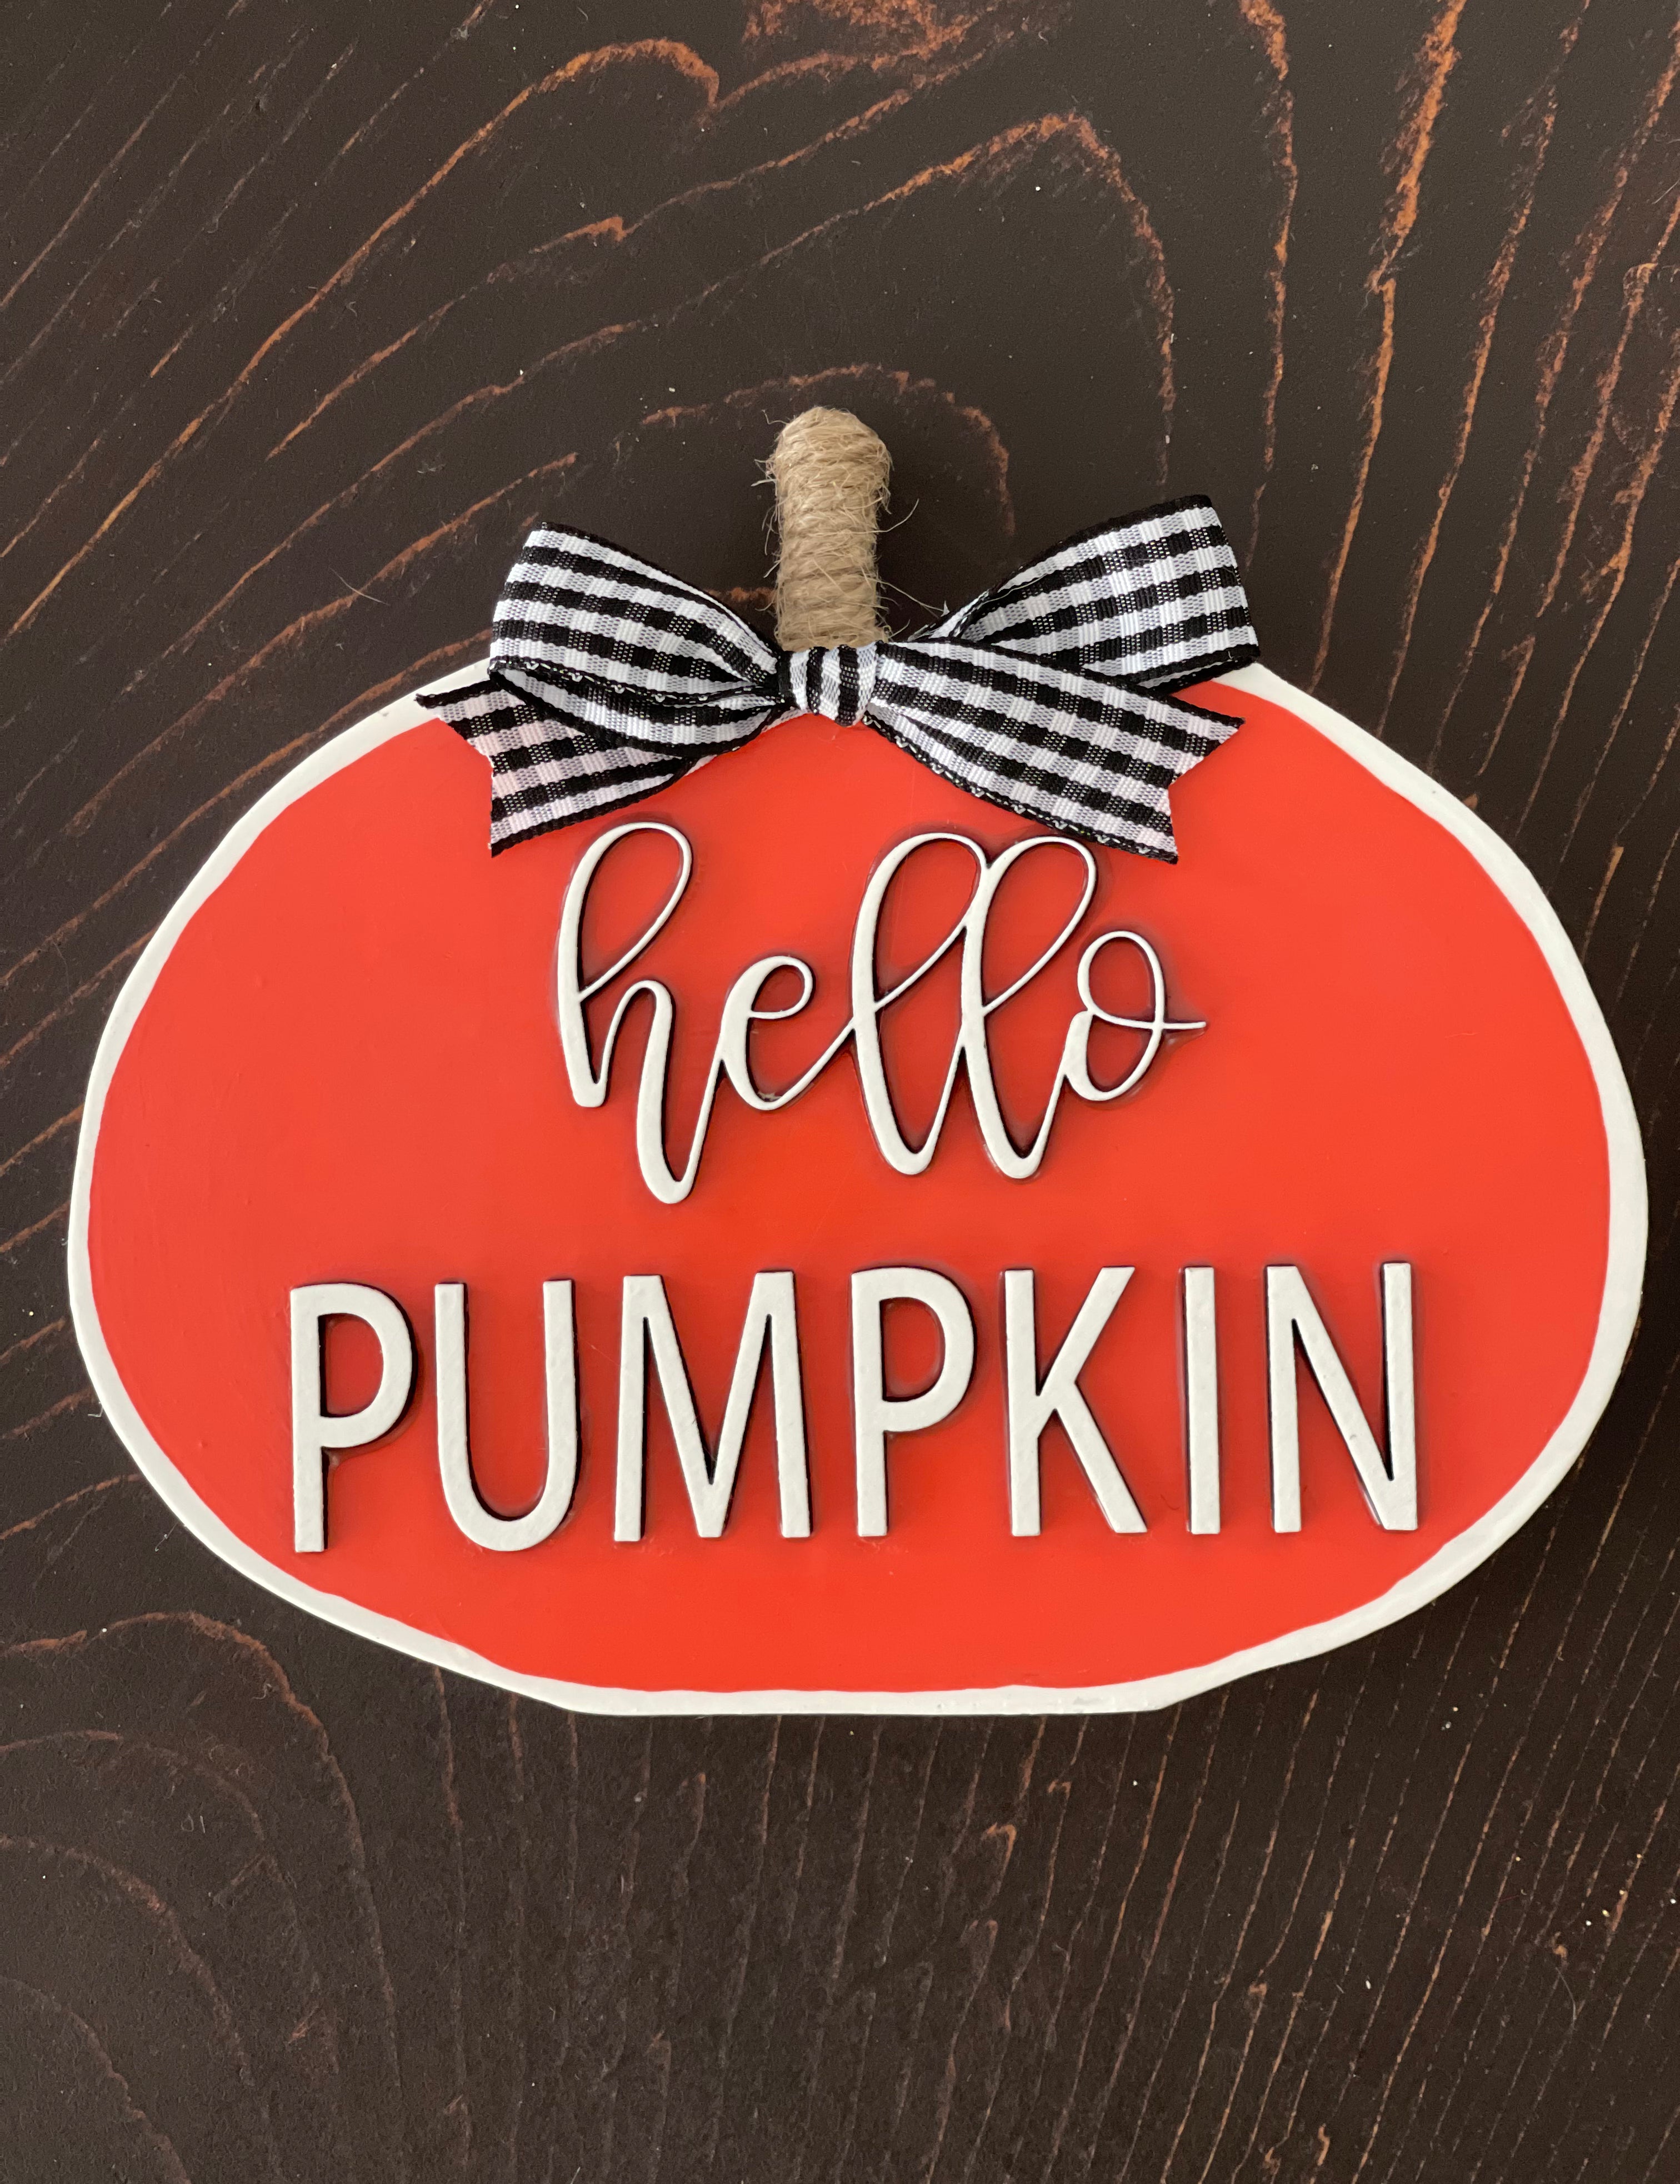 This image shows the Hello Pumpkin displayed on a table.